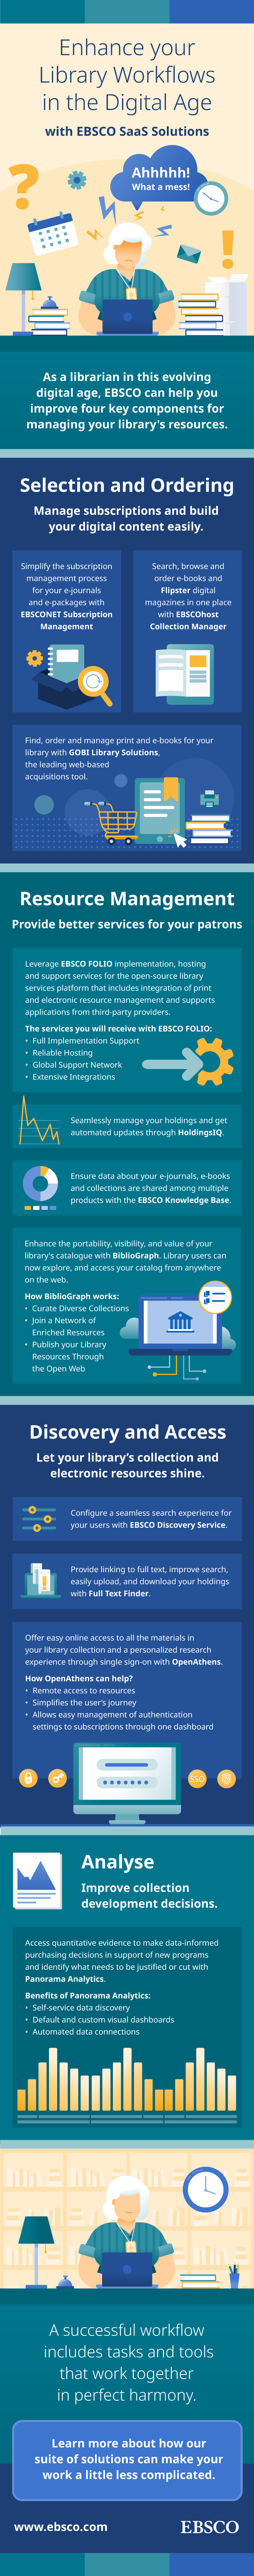 EBSCO SaaS Library Workflow Infographic   